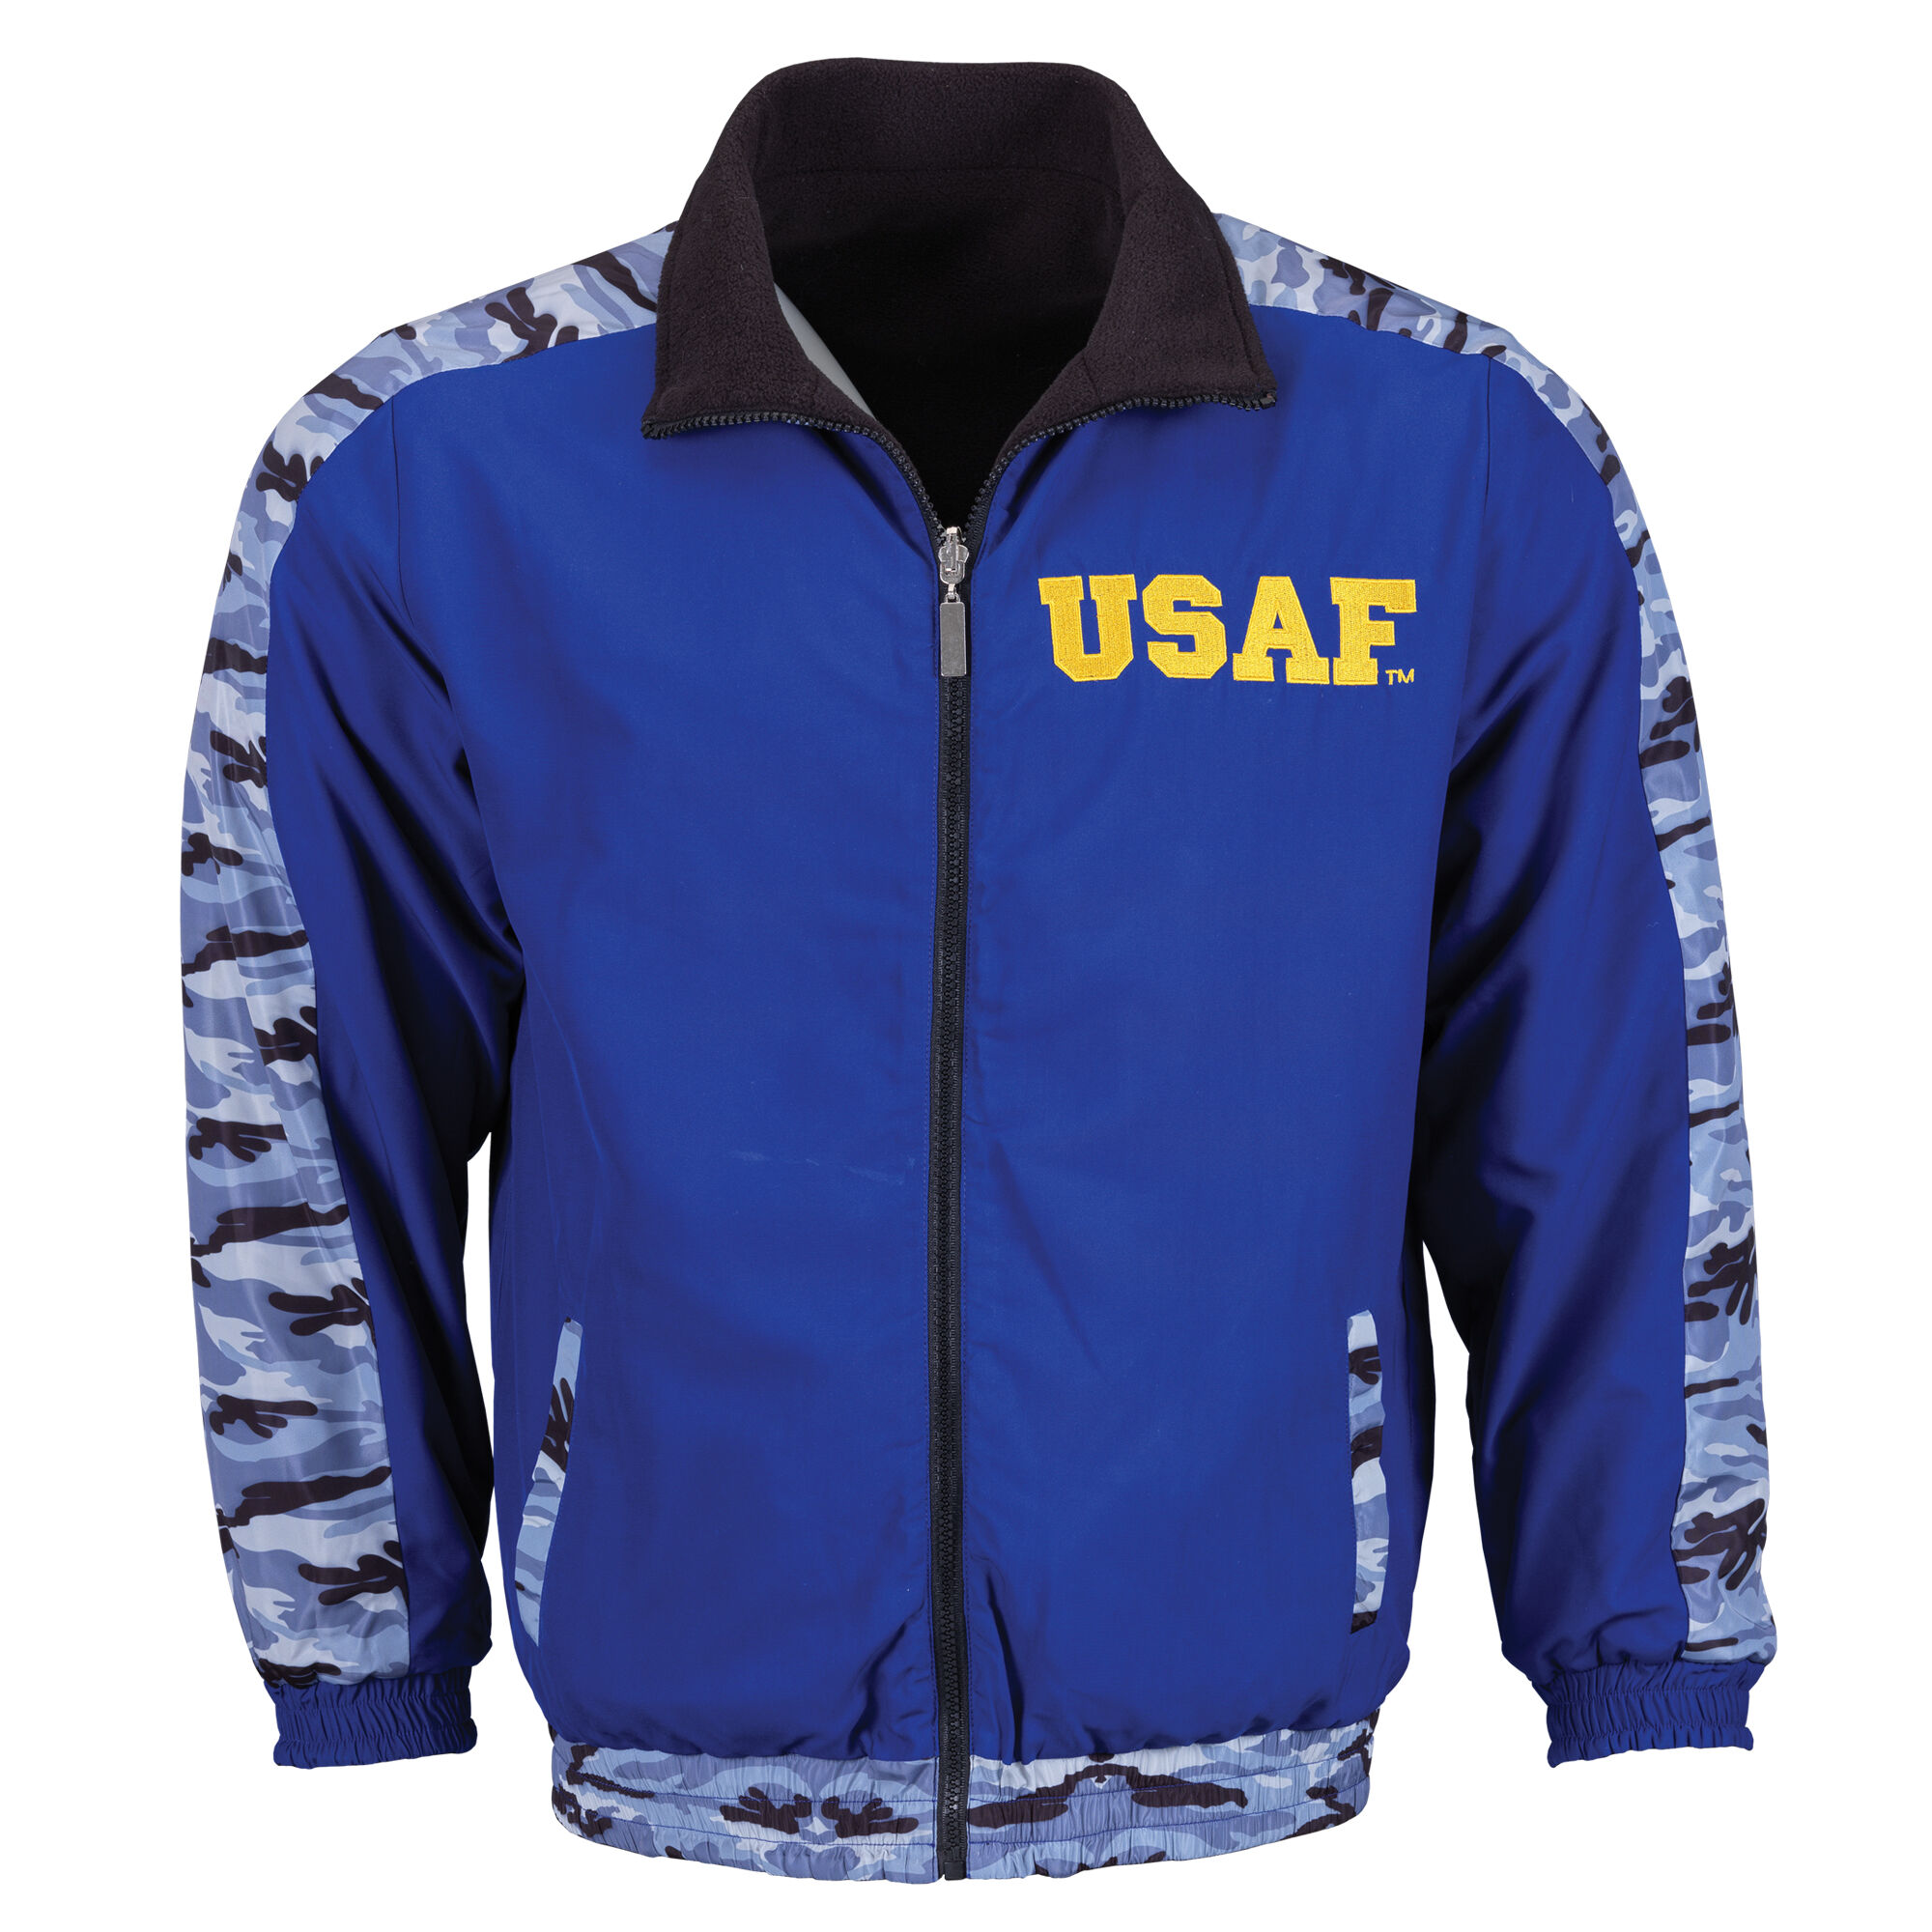 Personalized Reversible U S Air Force Bomber Jacket 5672 0048 b reverse